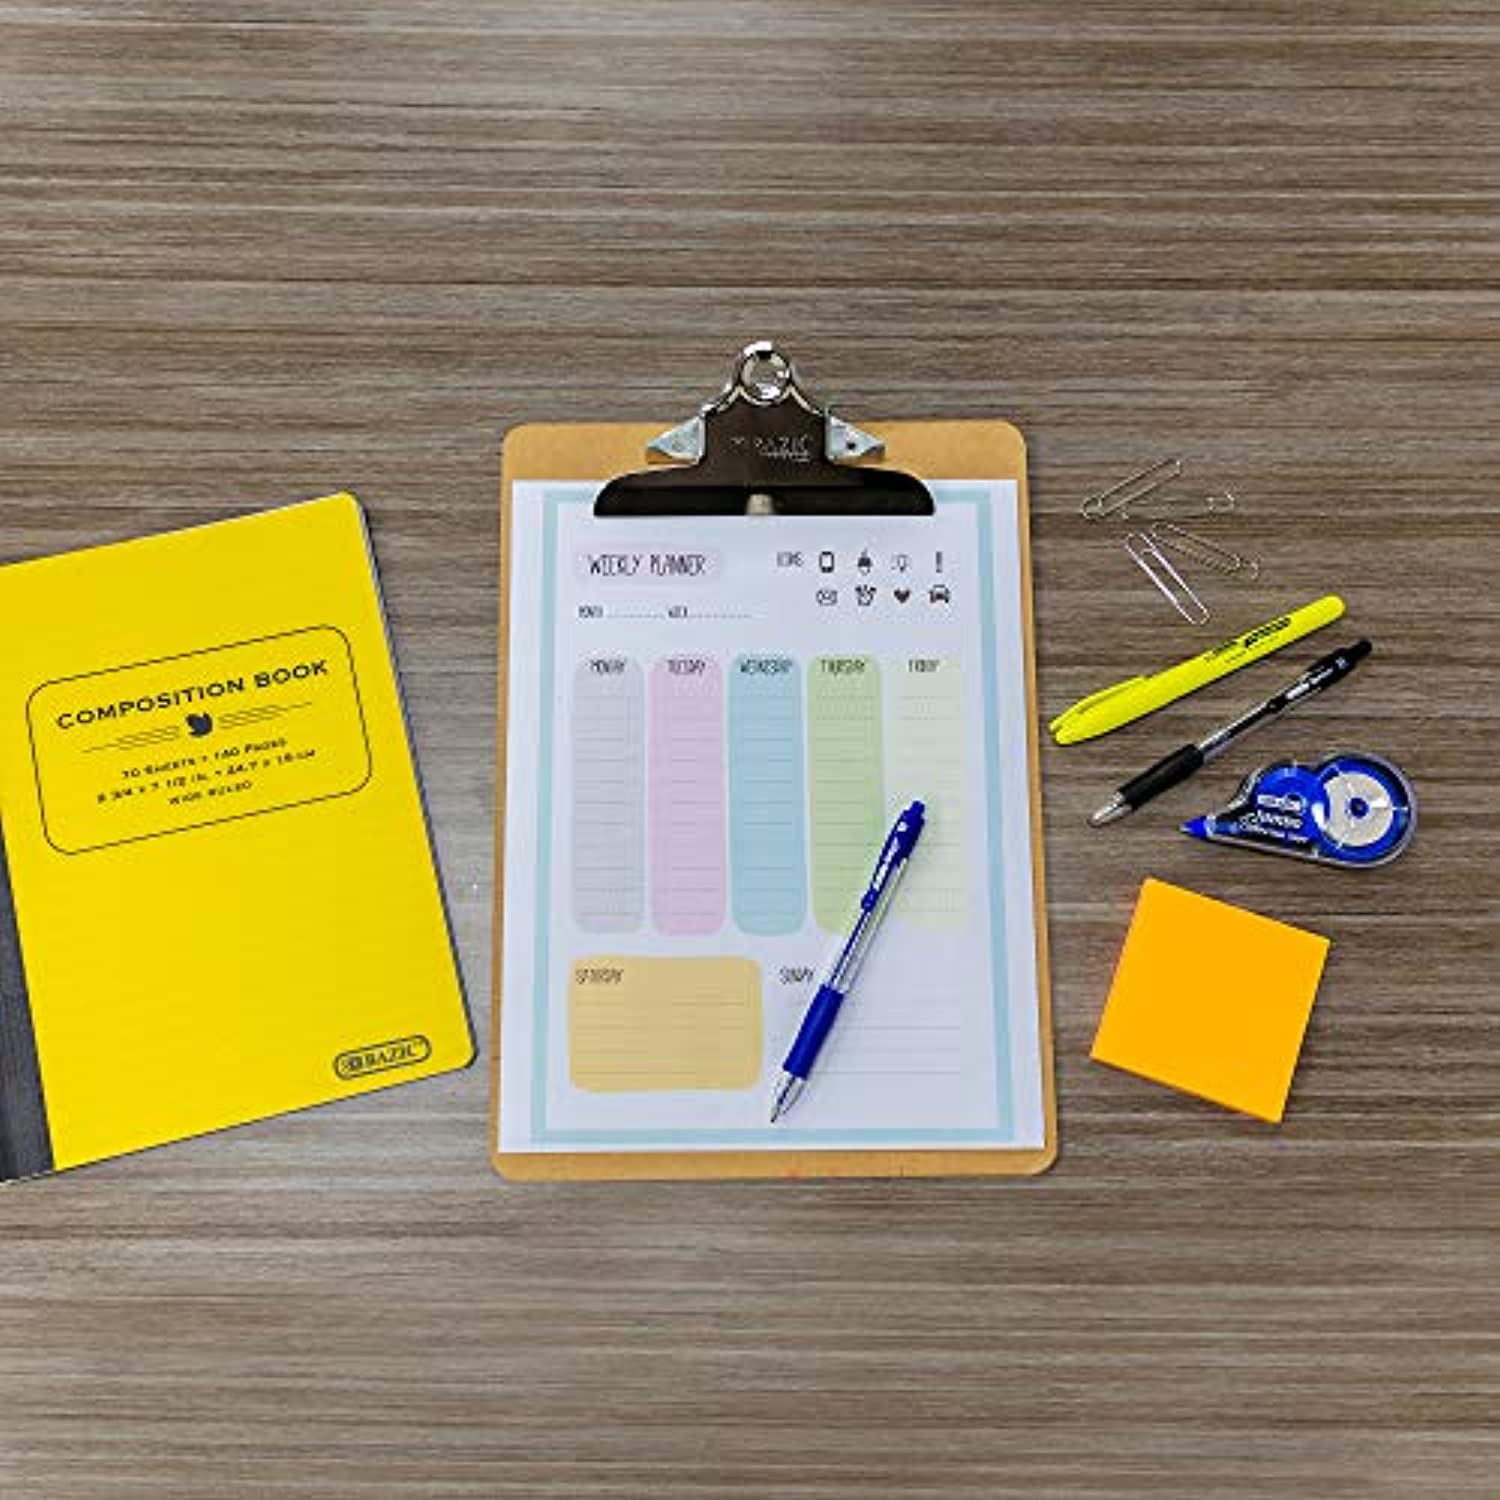 Memo Size Wood Hardboard Clipboard w/Sturdy Spring Clip, 9" x 6" Mini Small Paperboard Strong &amp; Large Capacity, Business Office School Teacher Student College